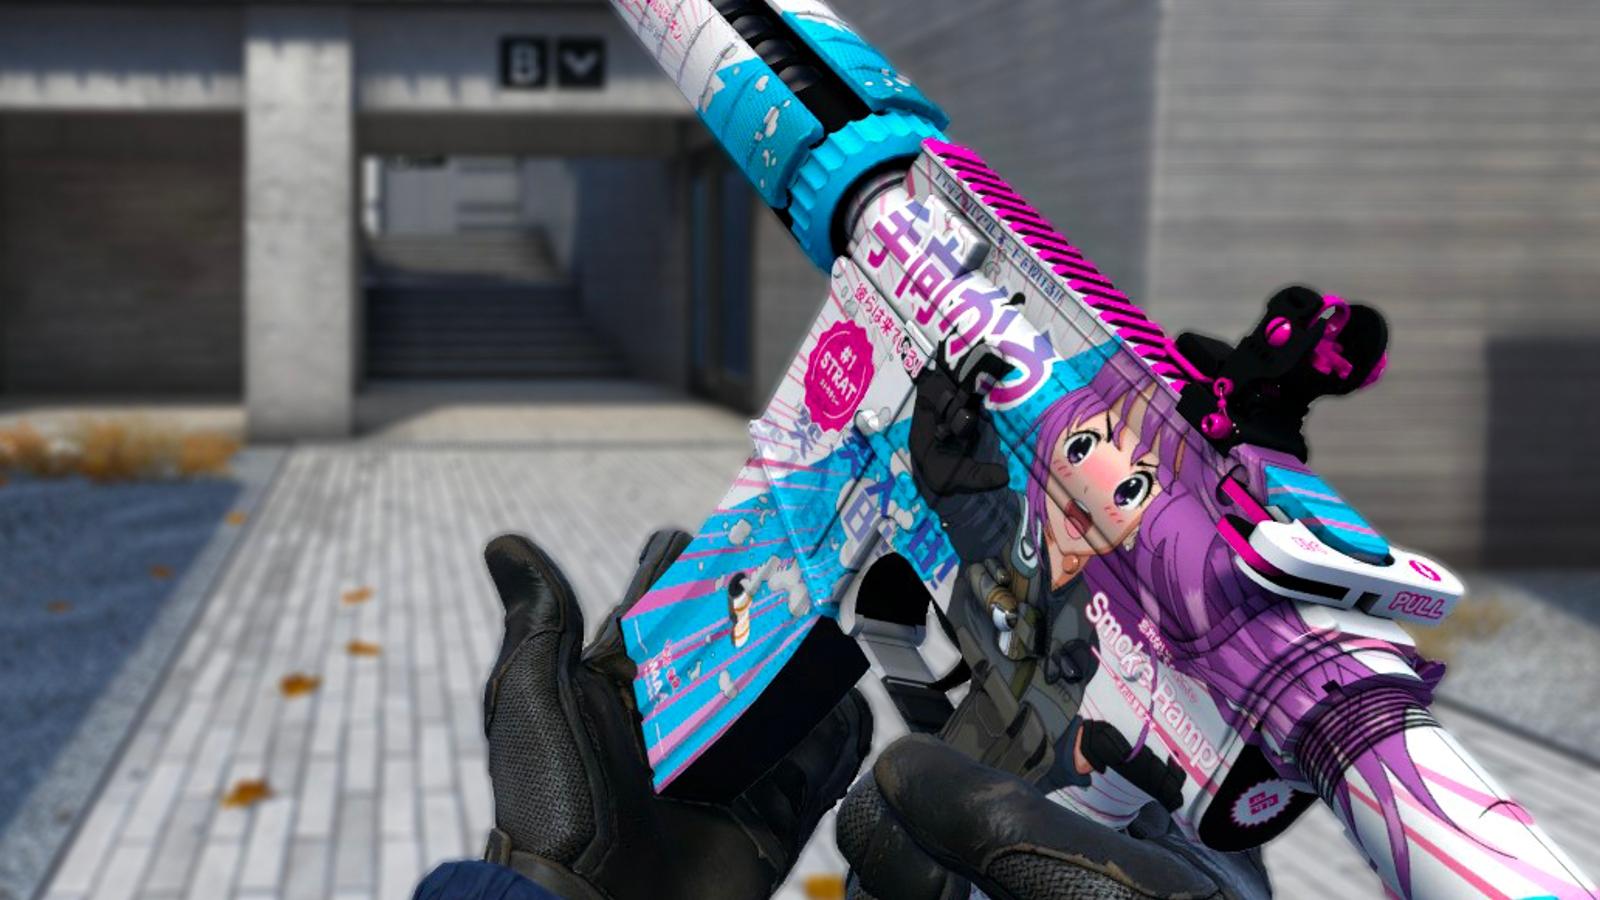 for apple download M4A4 Spider Lily cs go skin